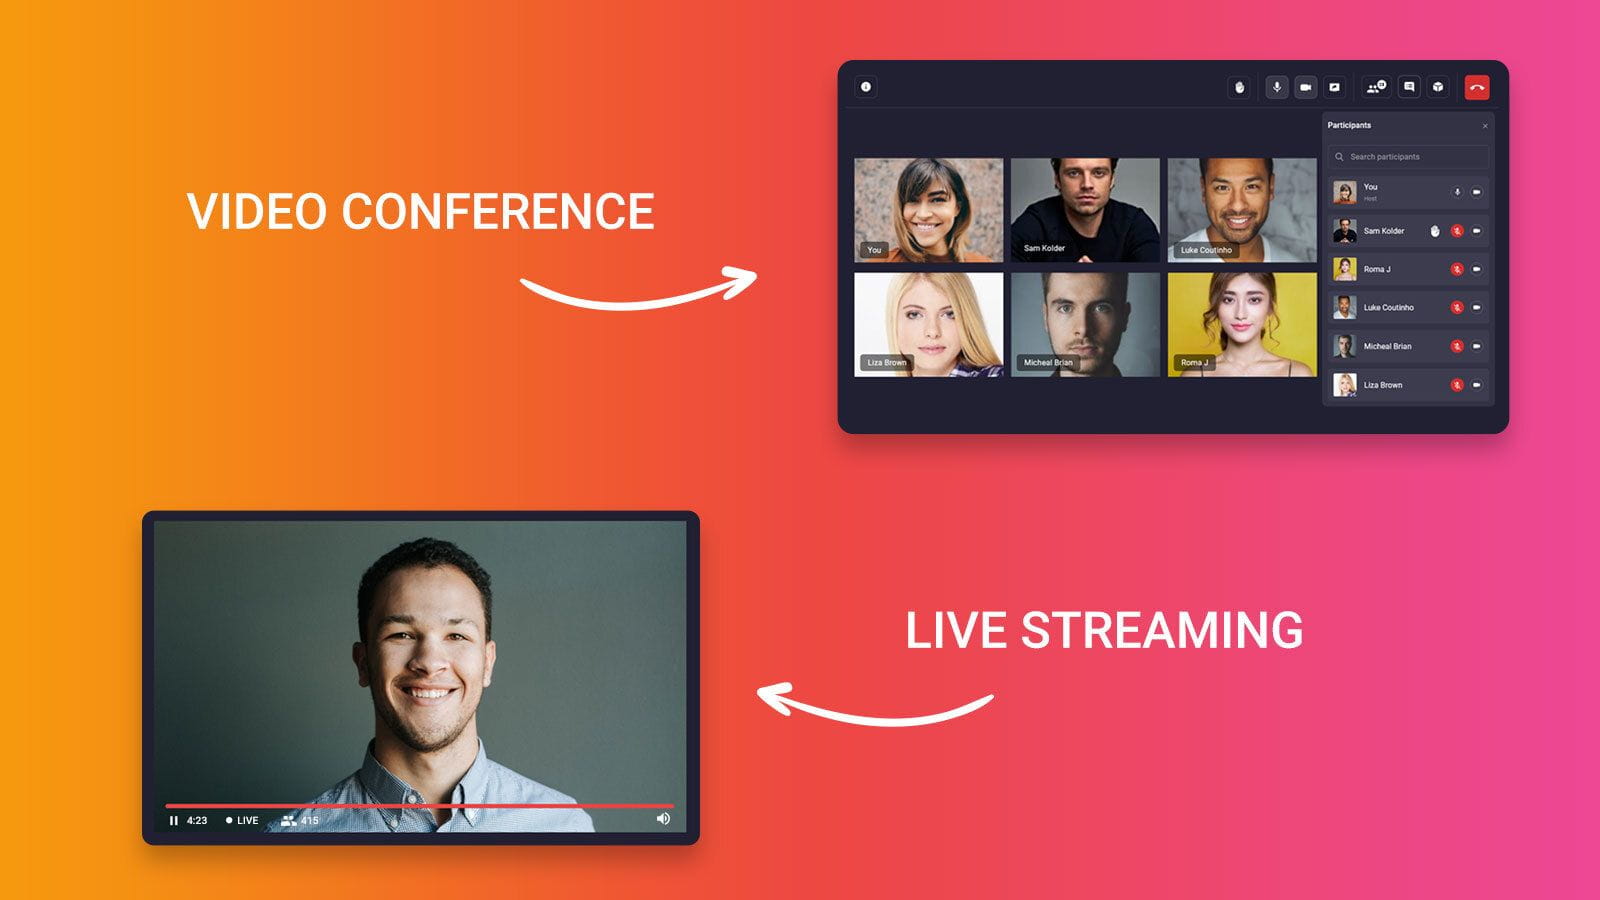 Live Streaming vs Video Conferencing - What's the difference?